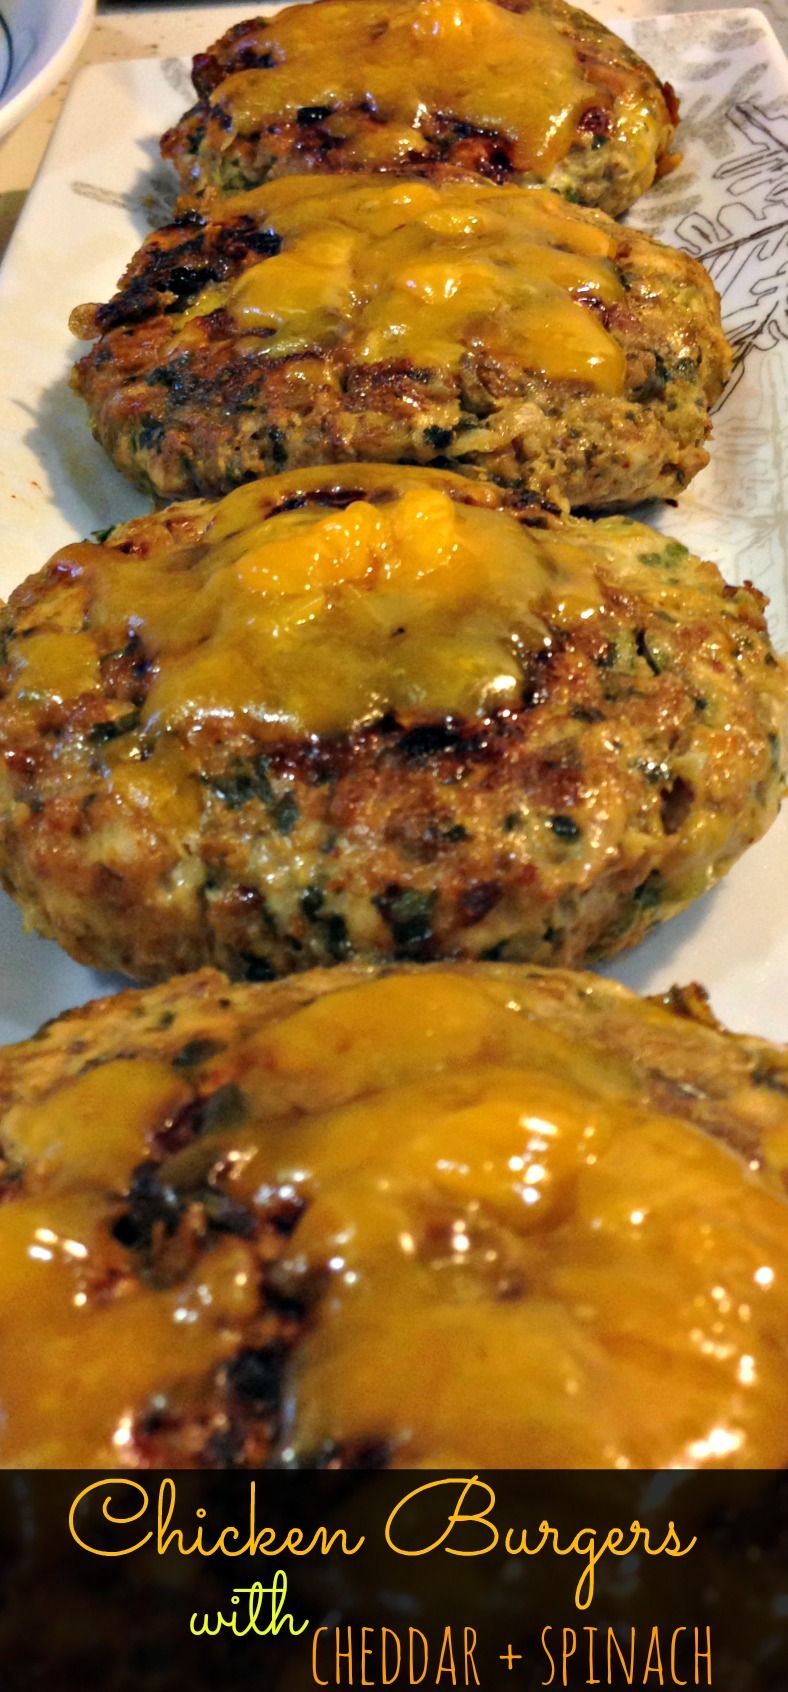 Chicken Burgers with Spinach & Cheddar – Clean eating, easy recipe would be grea